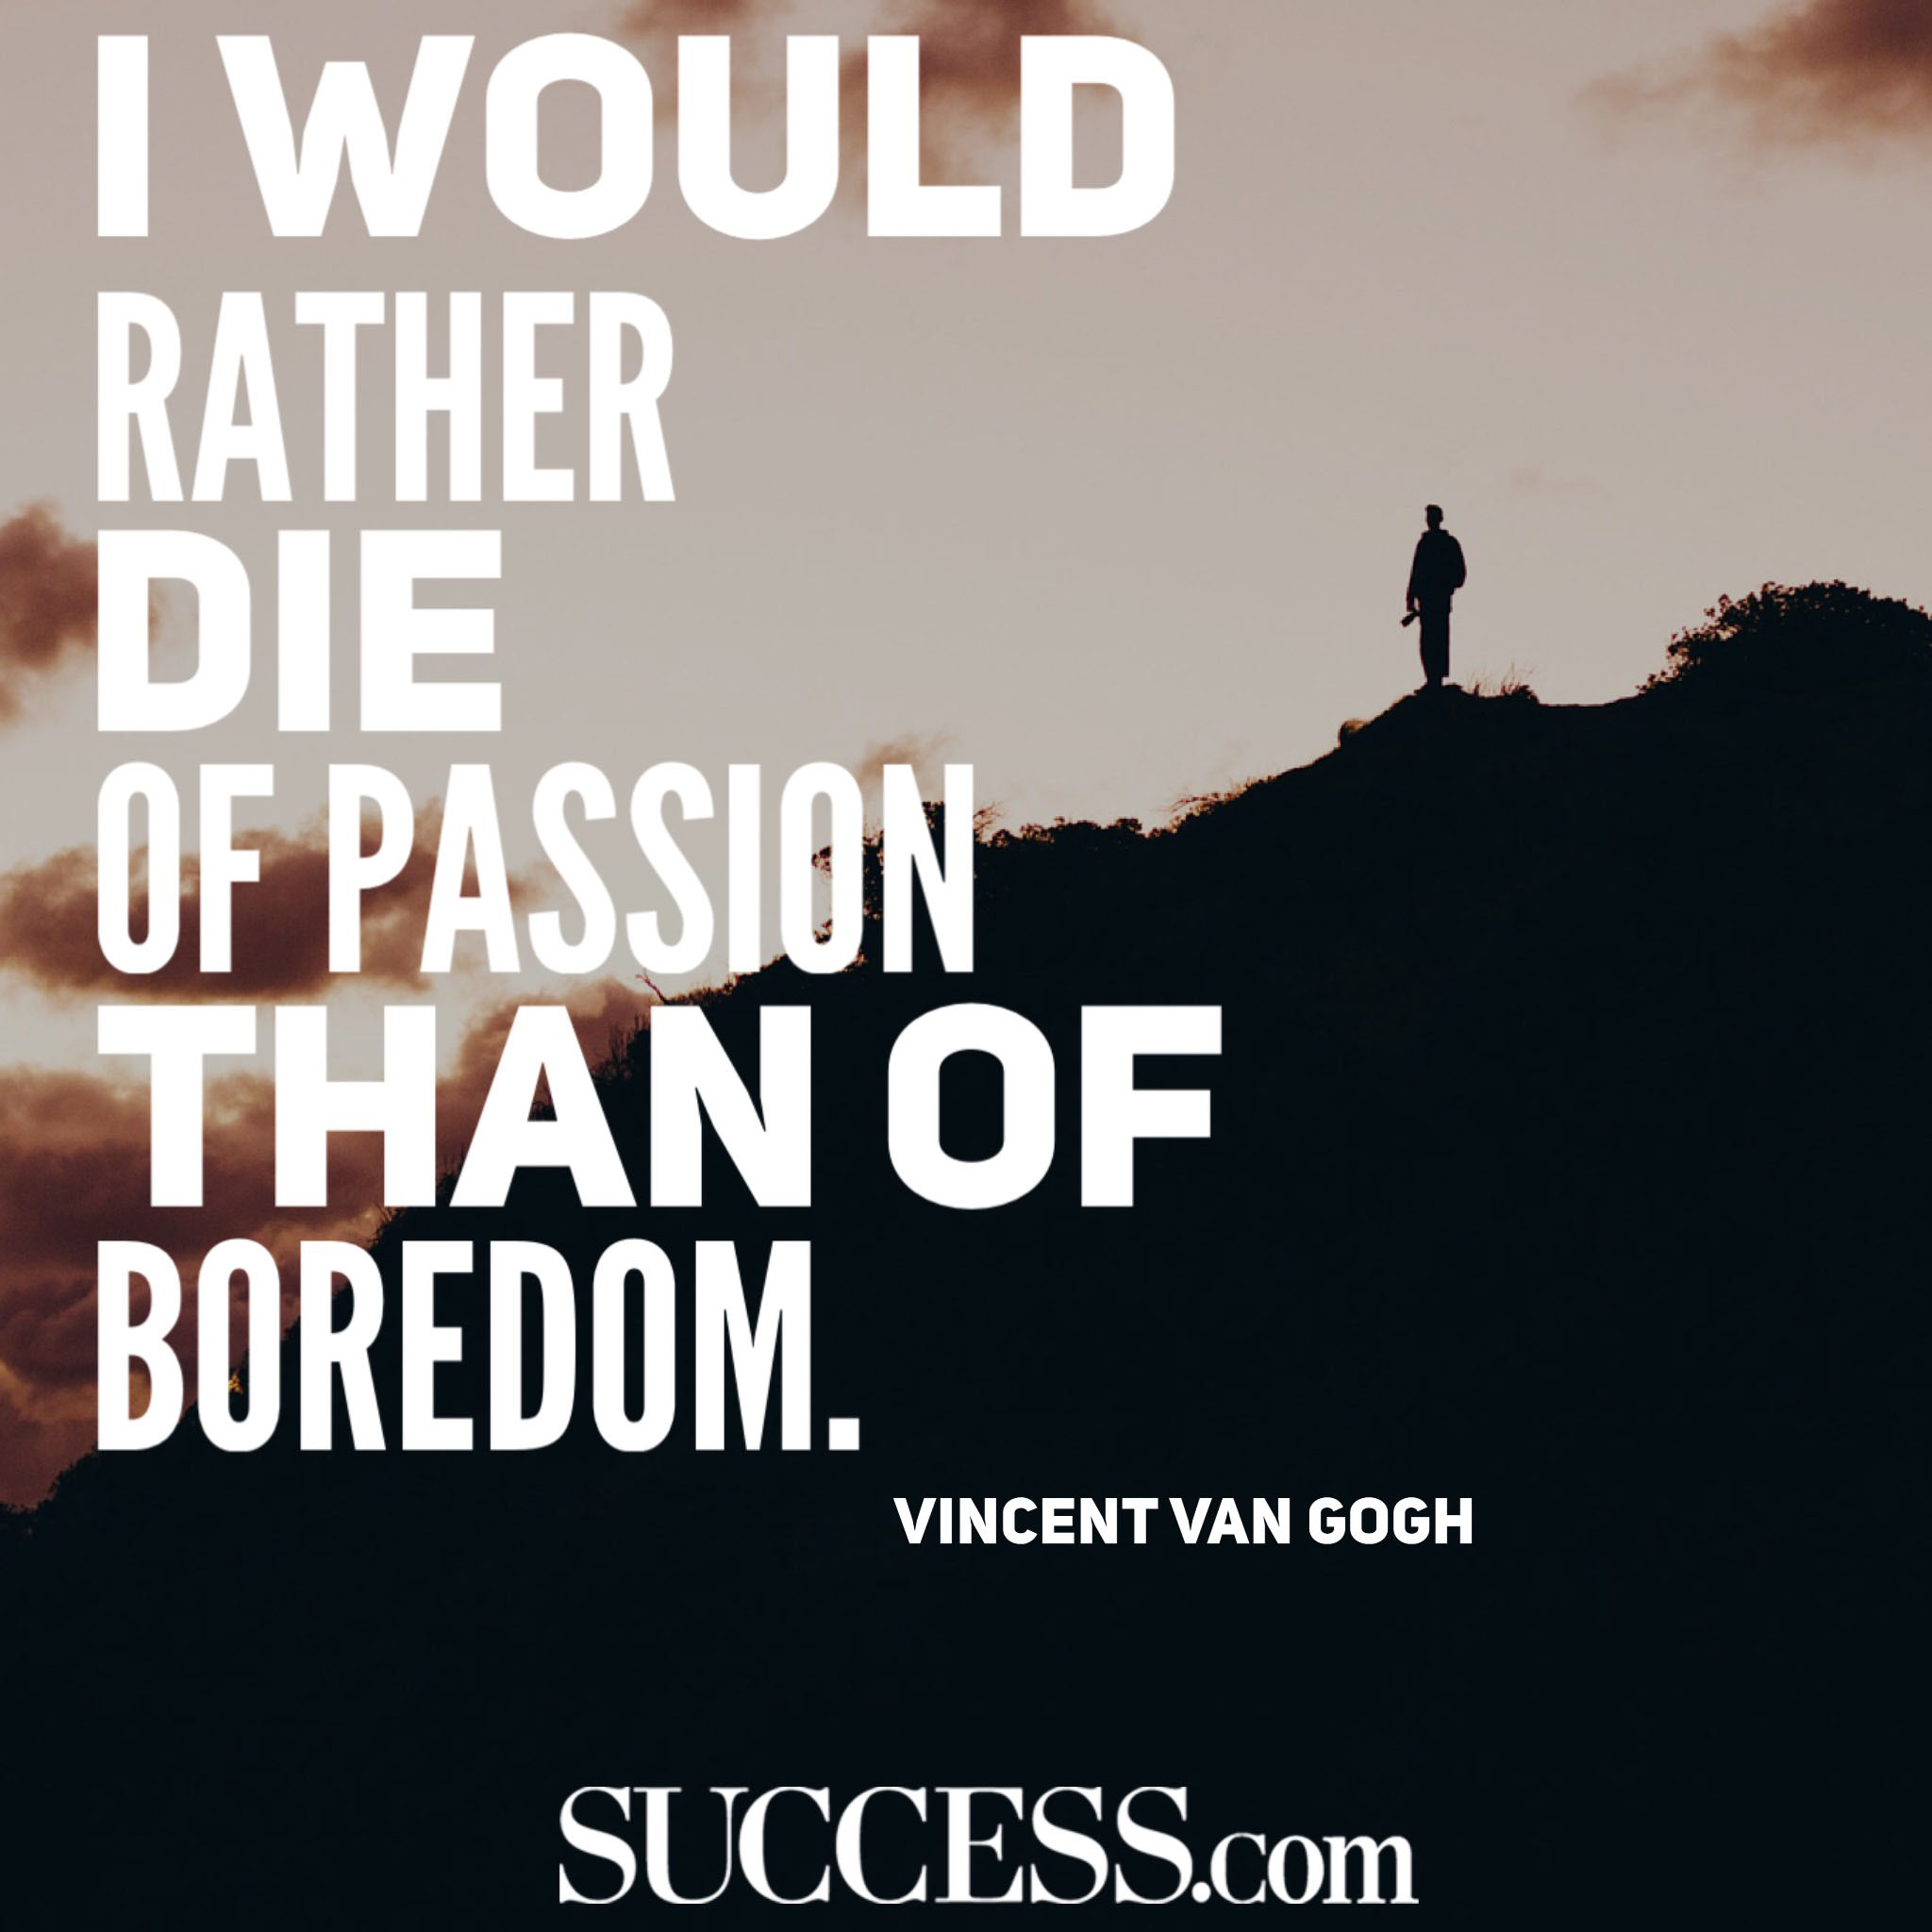 19 Quotes About Following Your Passion | SUCCESS